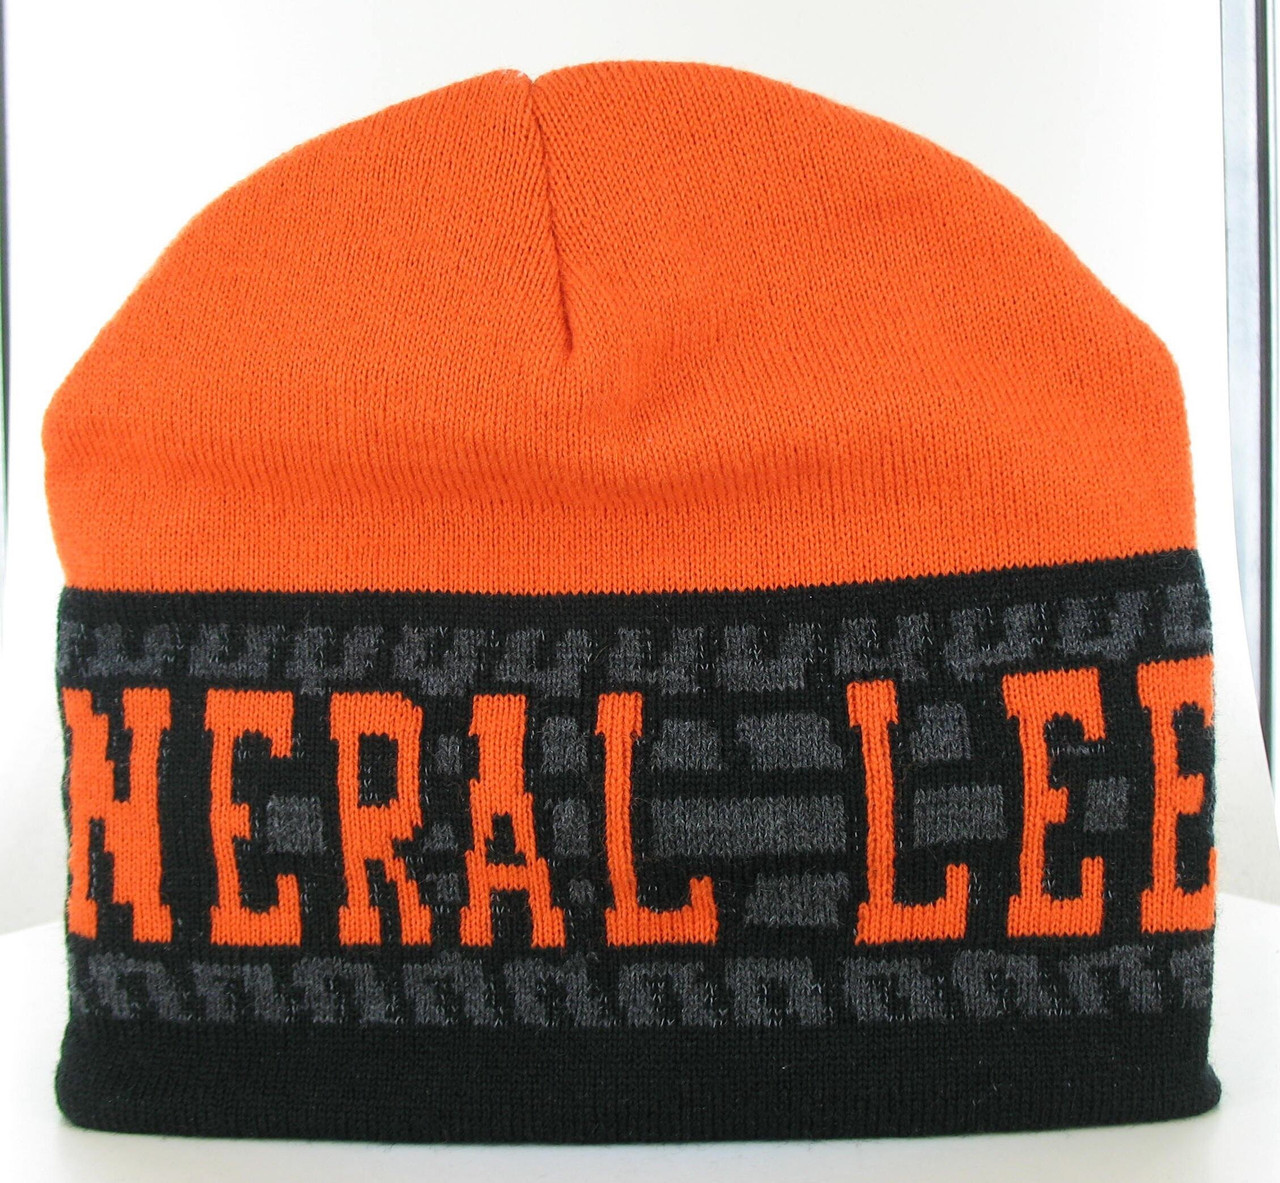 Cooter's General Lee Tire Tracks Beanie